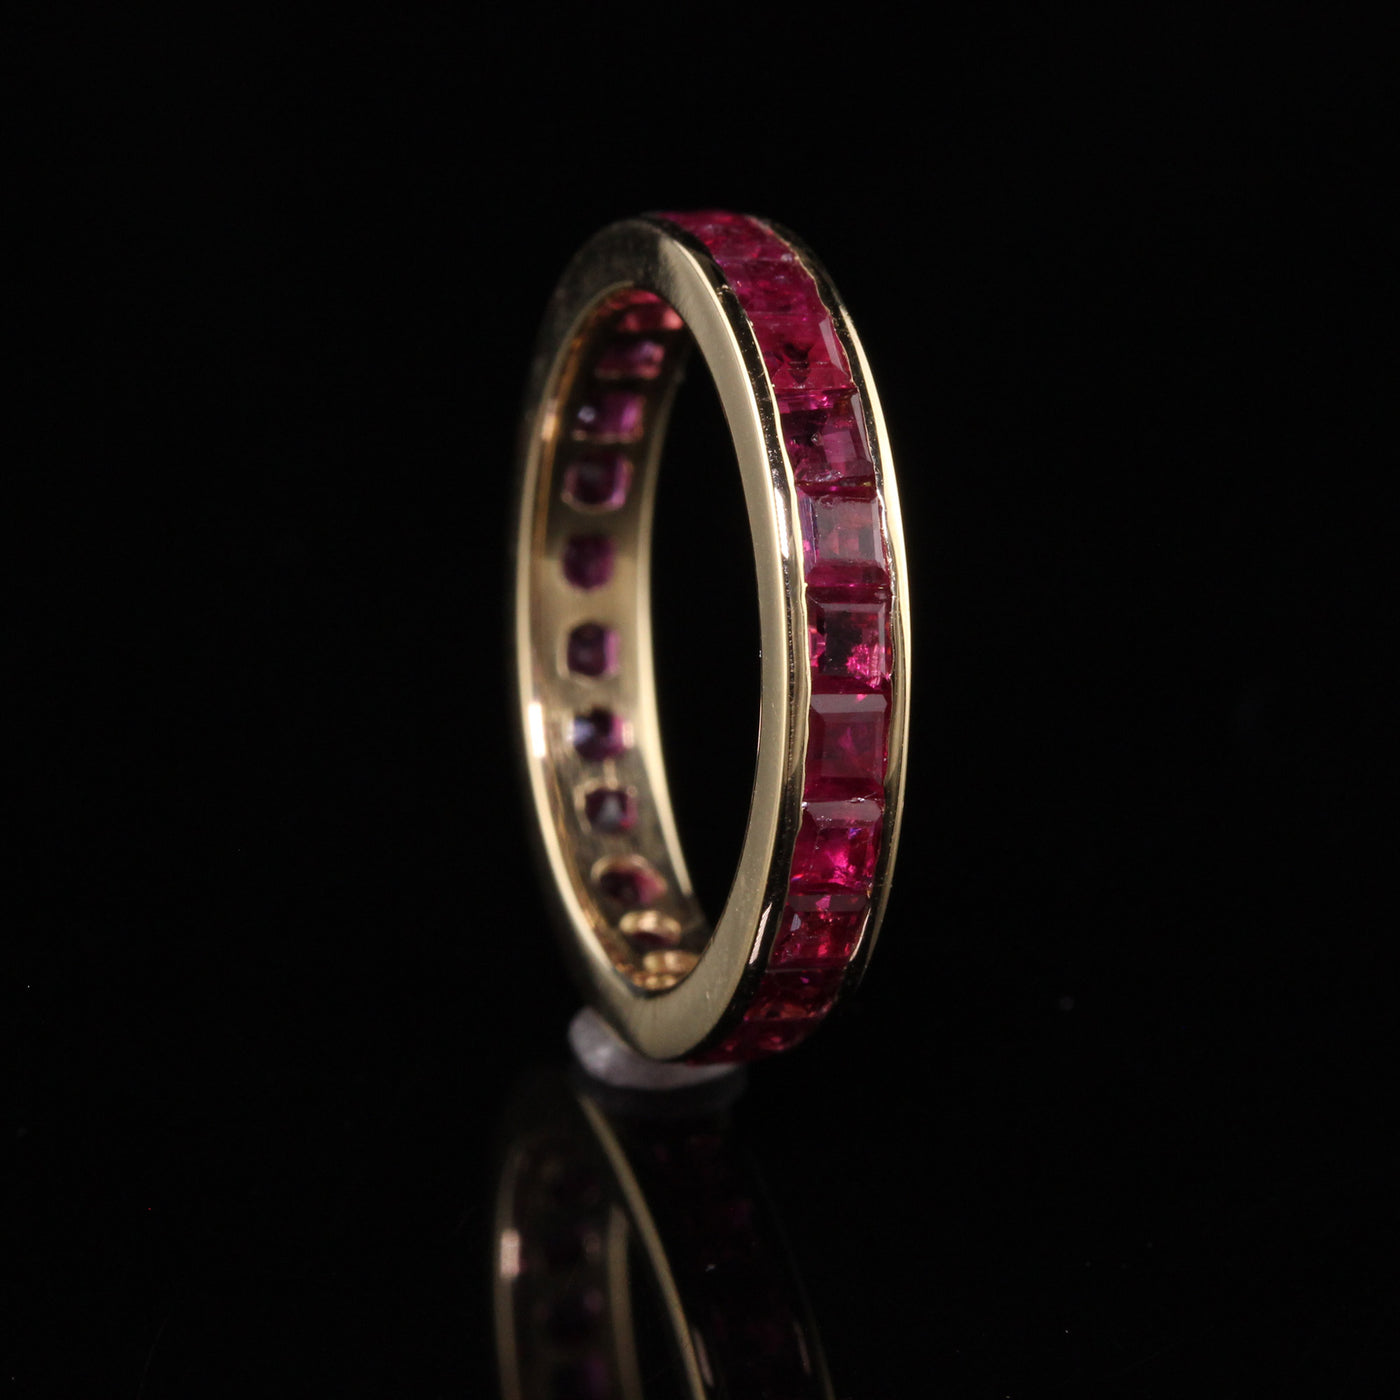 Vintage Estate 18K Yellow Gold Square Cut Ruby Eternity Band